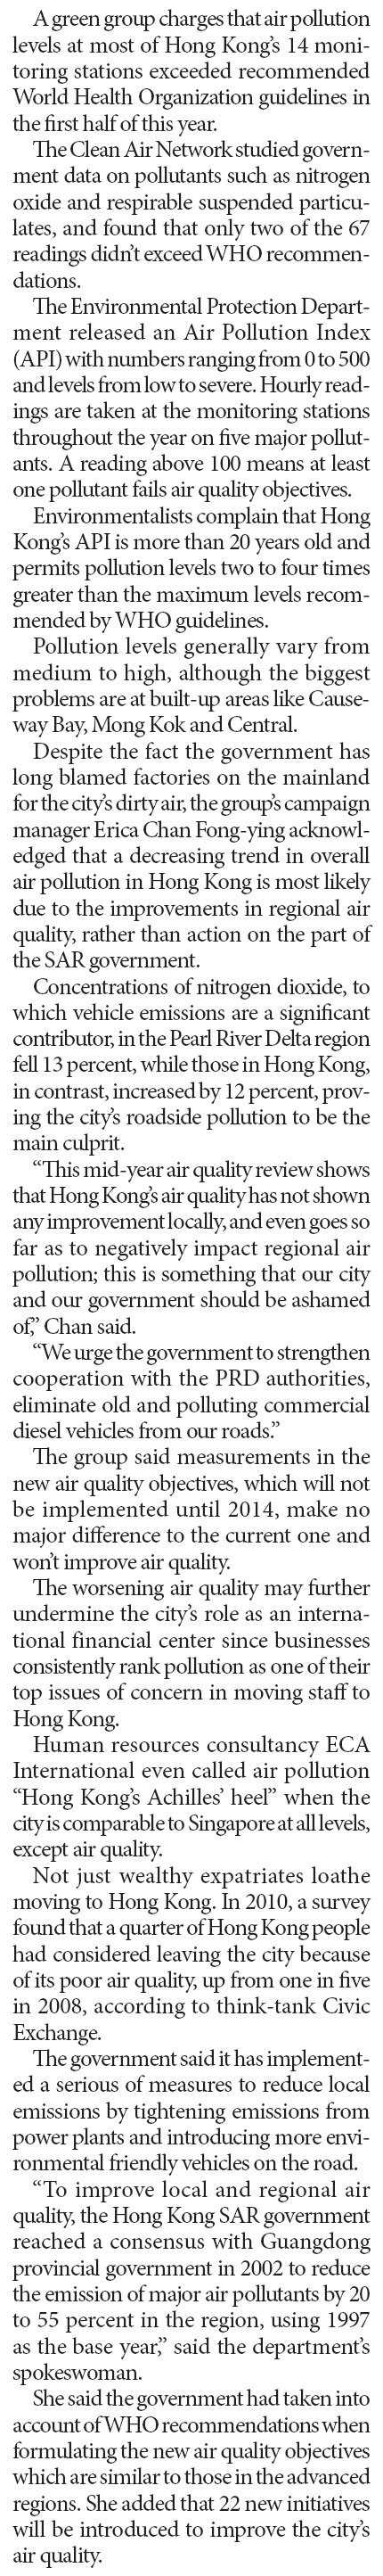 Air quality below WHO standards: Green group